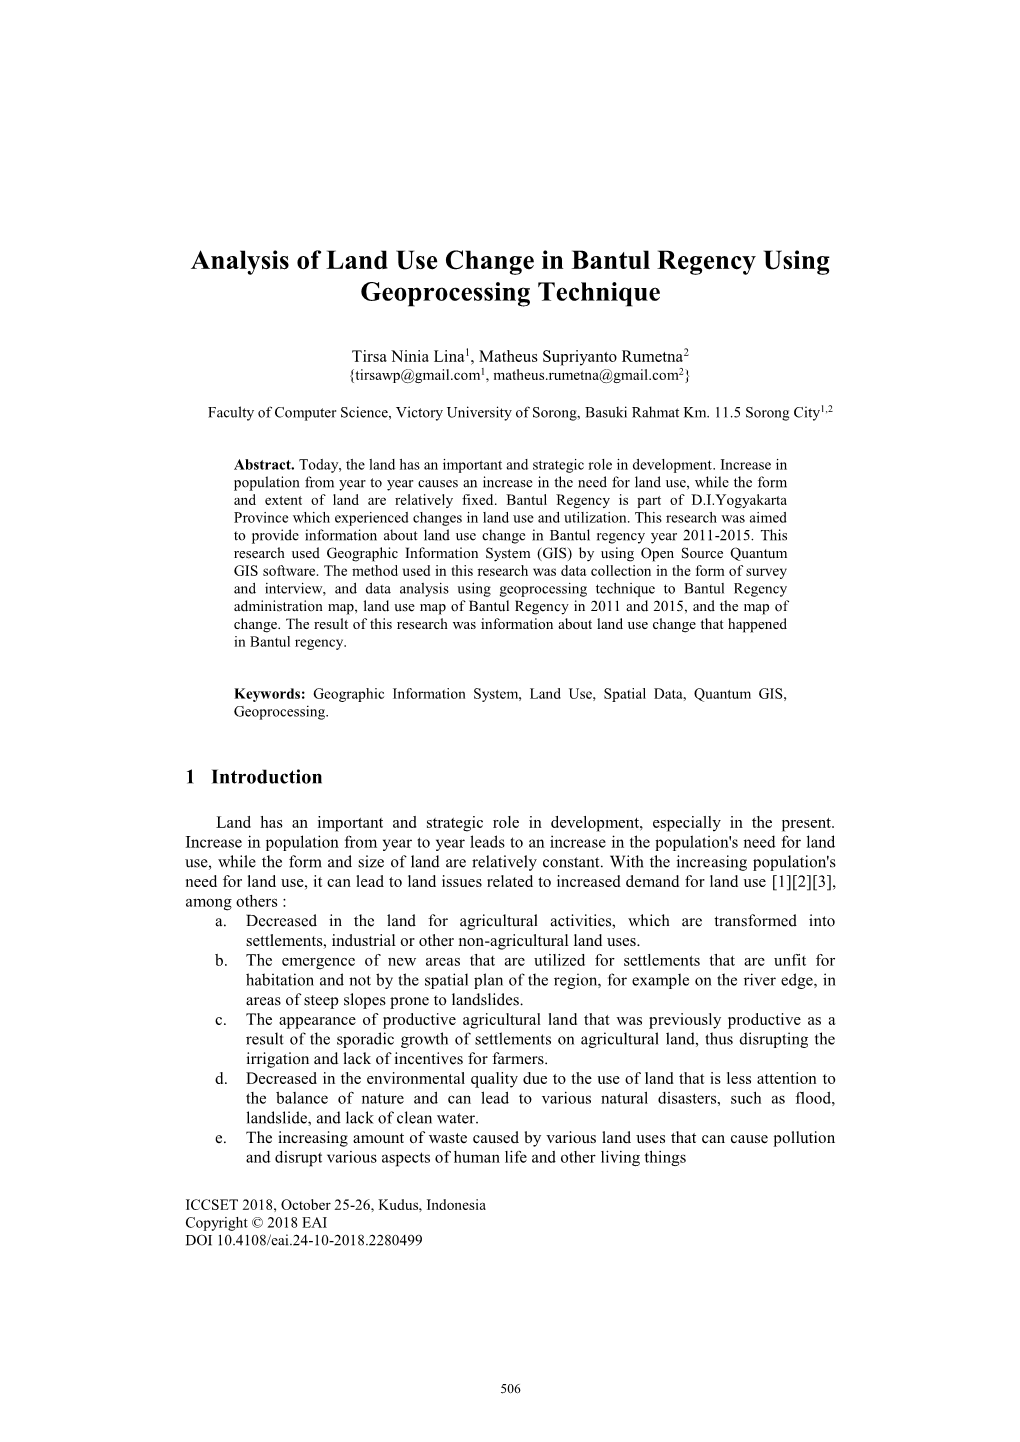 Analysis of Land Use Change in Bantul Regency Using Geoprocessing Technique